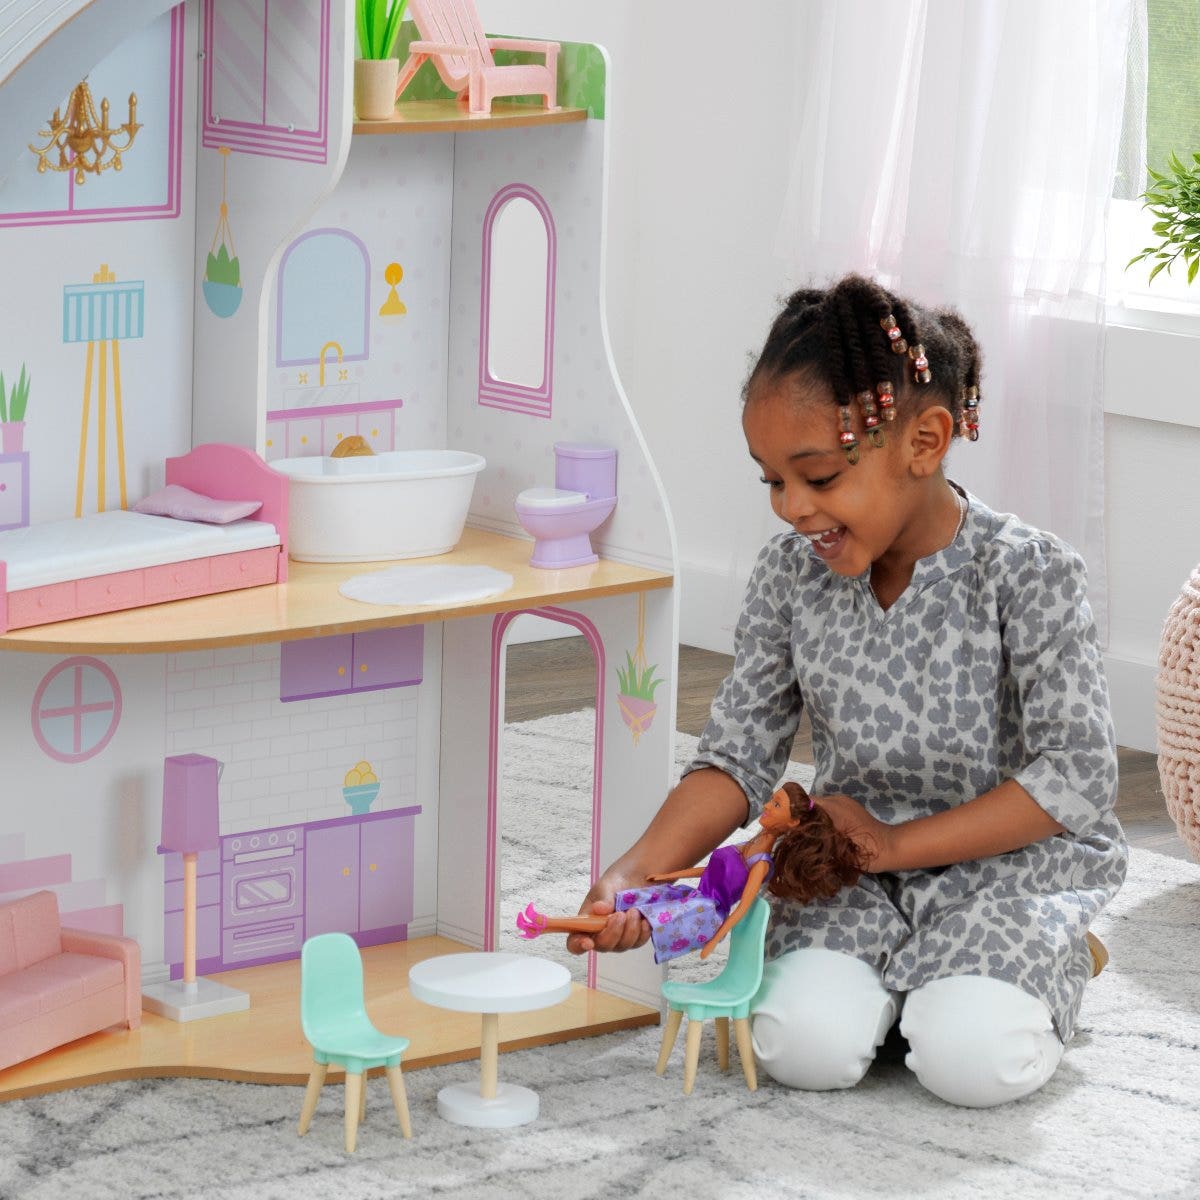 Decorate Right Away: This dollhouse comes fully furnished, so the fun can start immediately. With 12 play accessories, including a bathtub, toilet, table and chairs, your house can be at home in an instant.